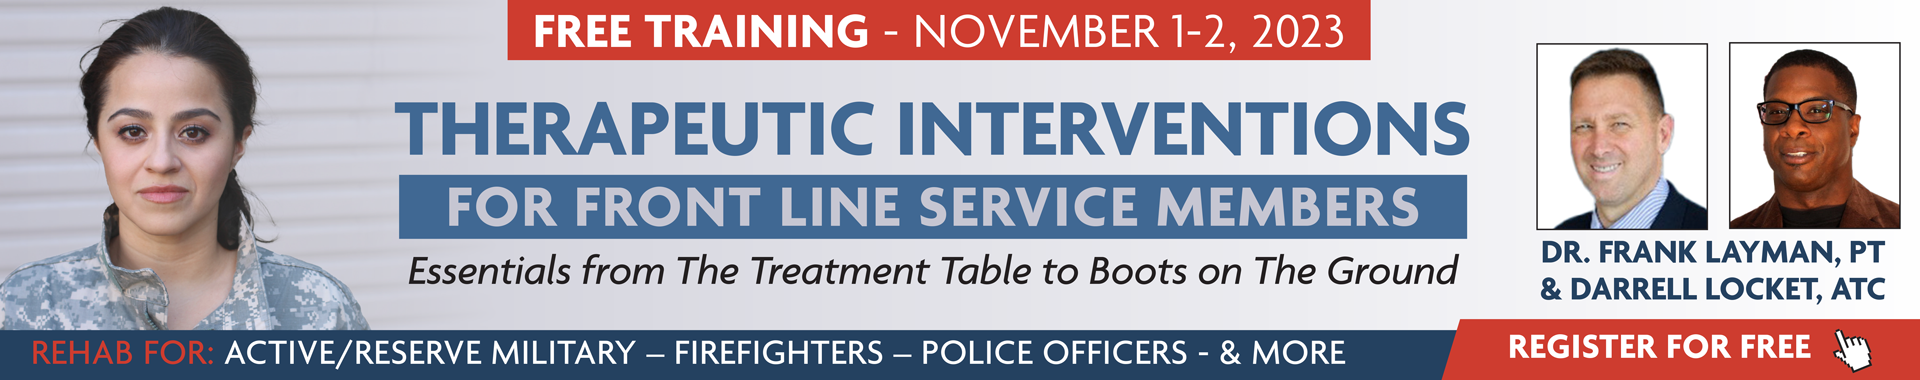 Therapeutic Interventions for Front Line Service Members: Essentials From the Treatment Table to Boots on the Ground